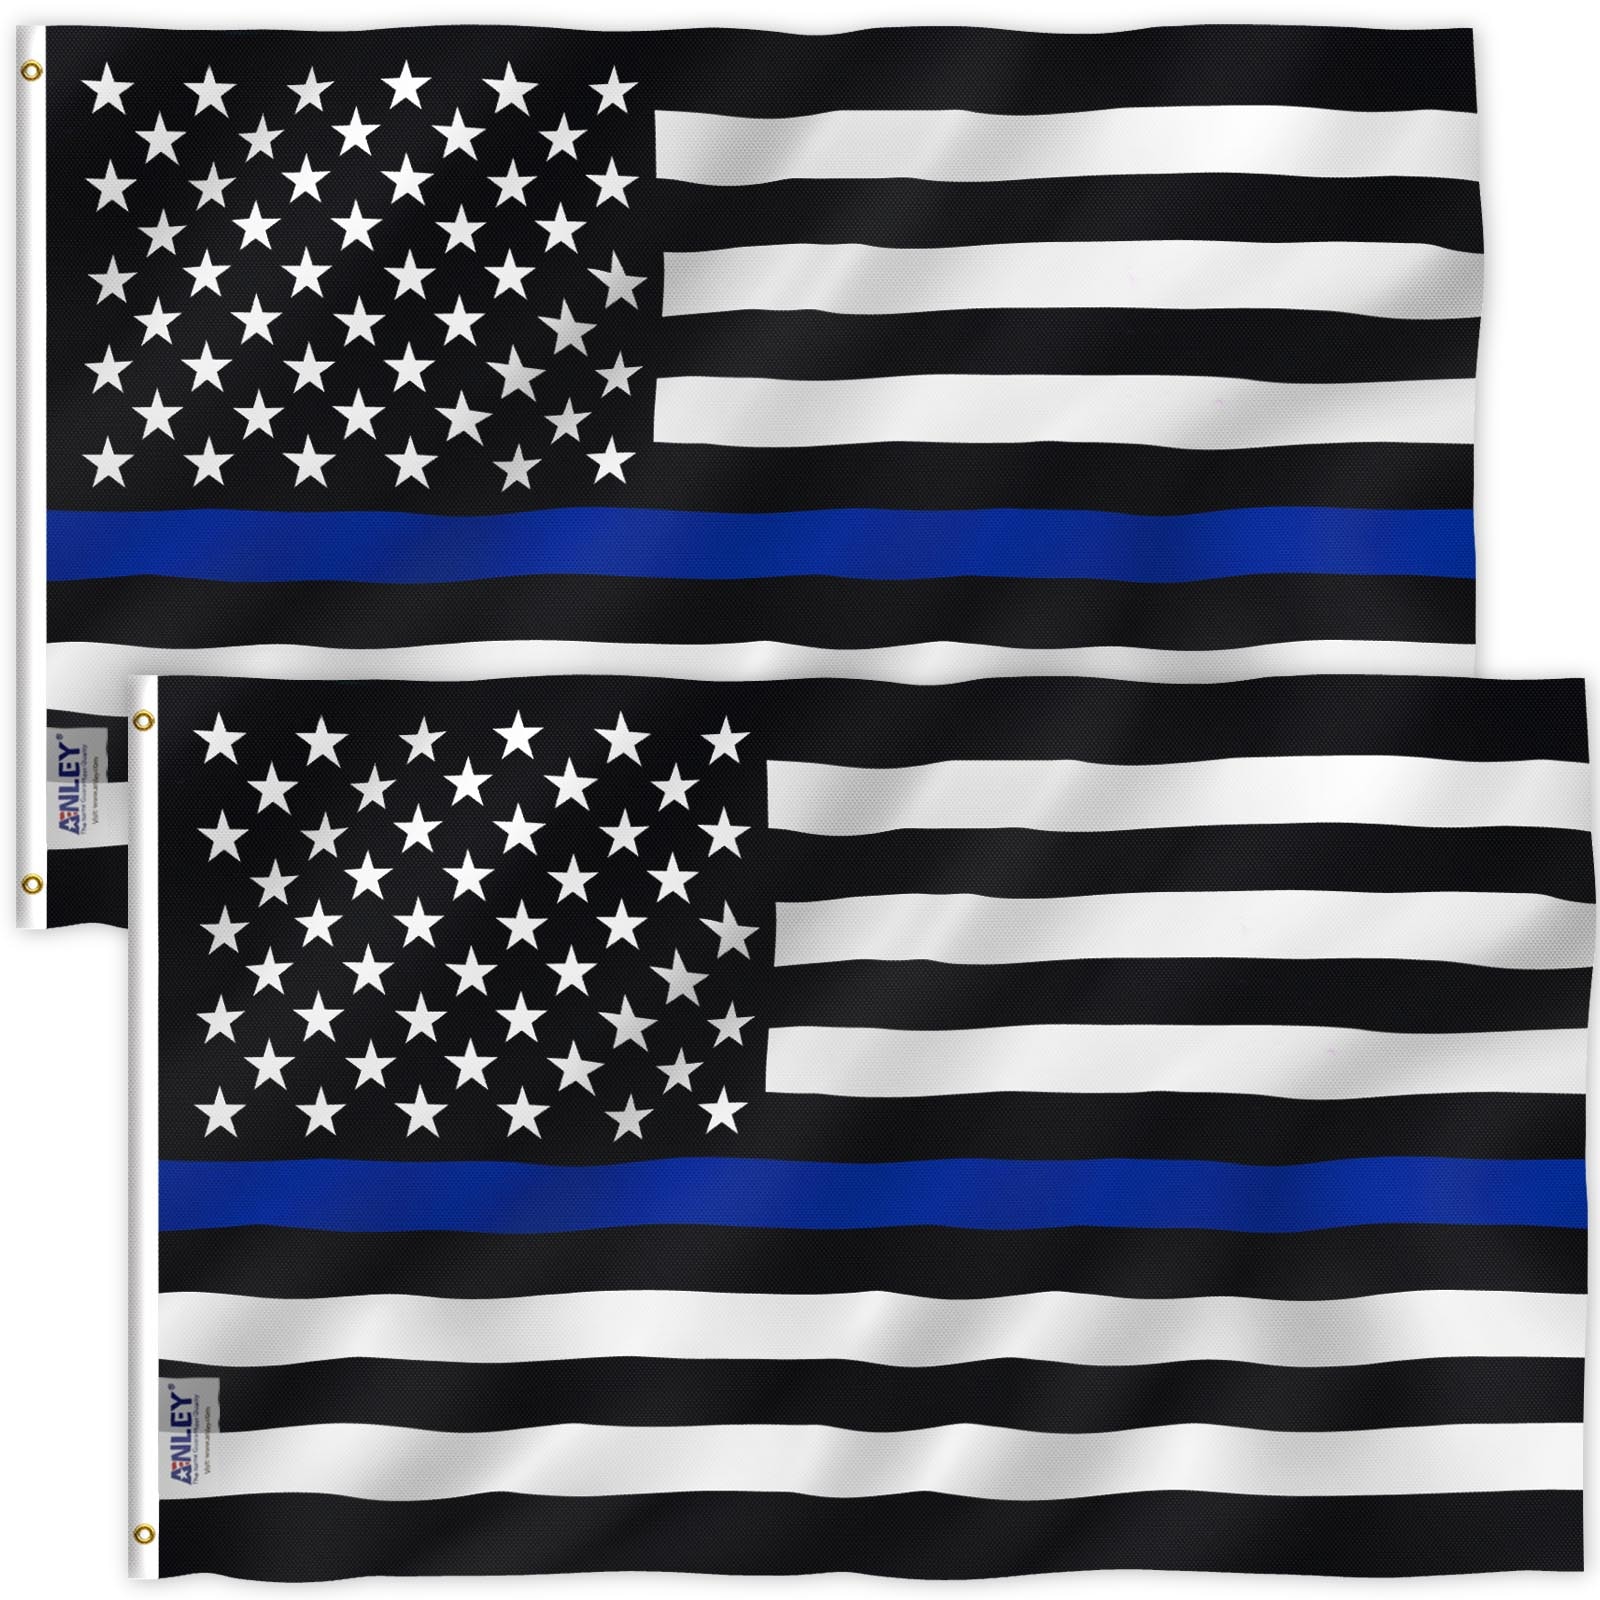 American Flag  3x5 Foot with Grommets 2 Pack Police Thin Blue Line and U.S 